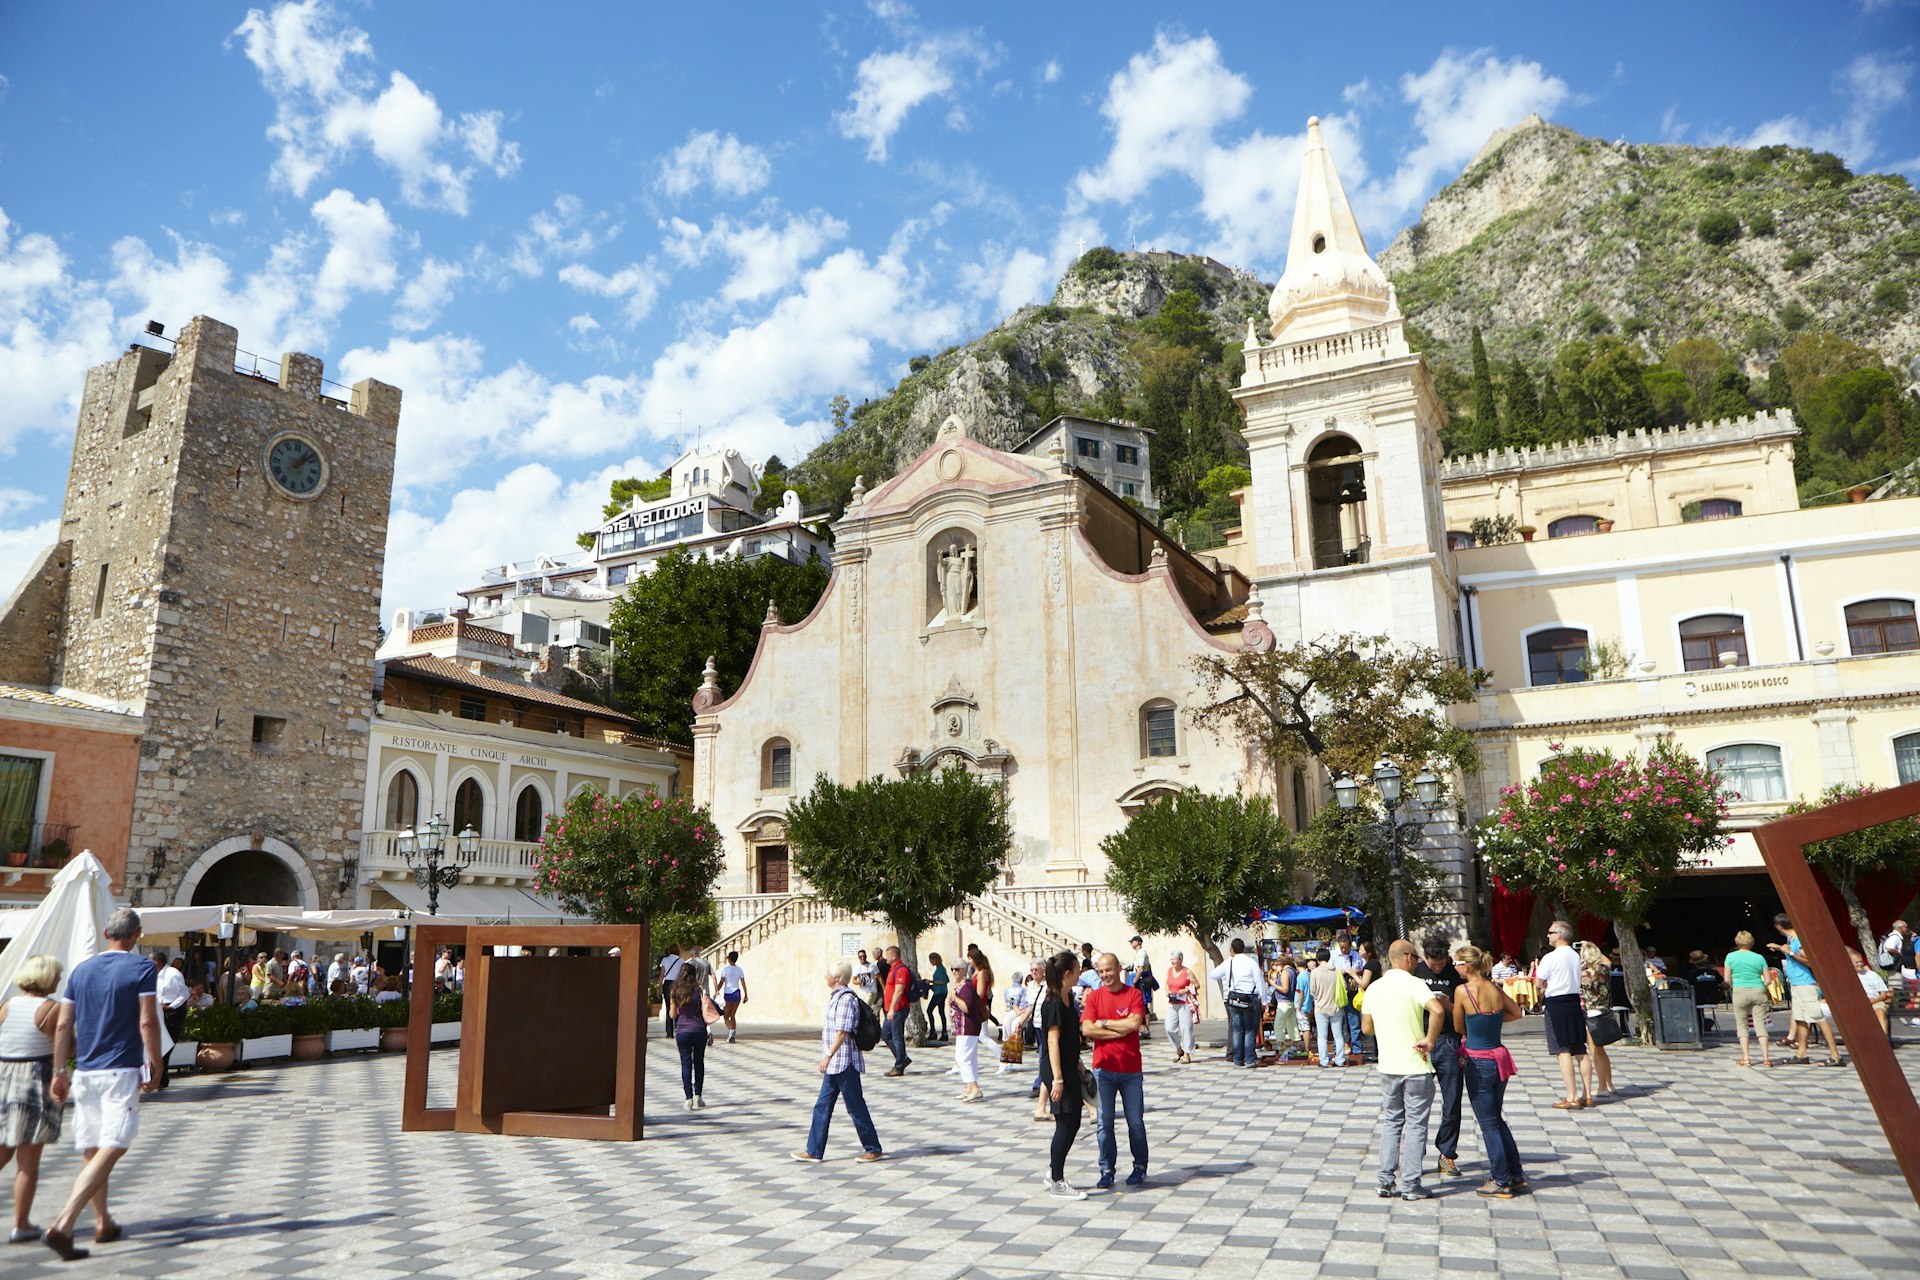 An Italian piazza dotted with people and an ornate church with a mountain in the background